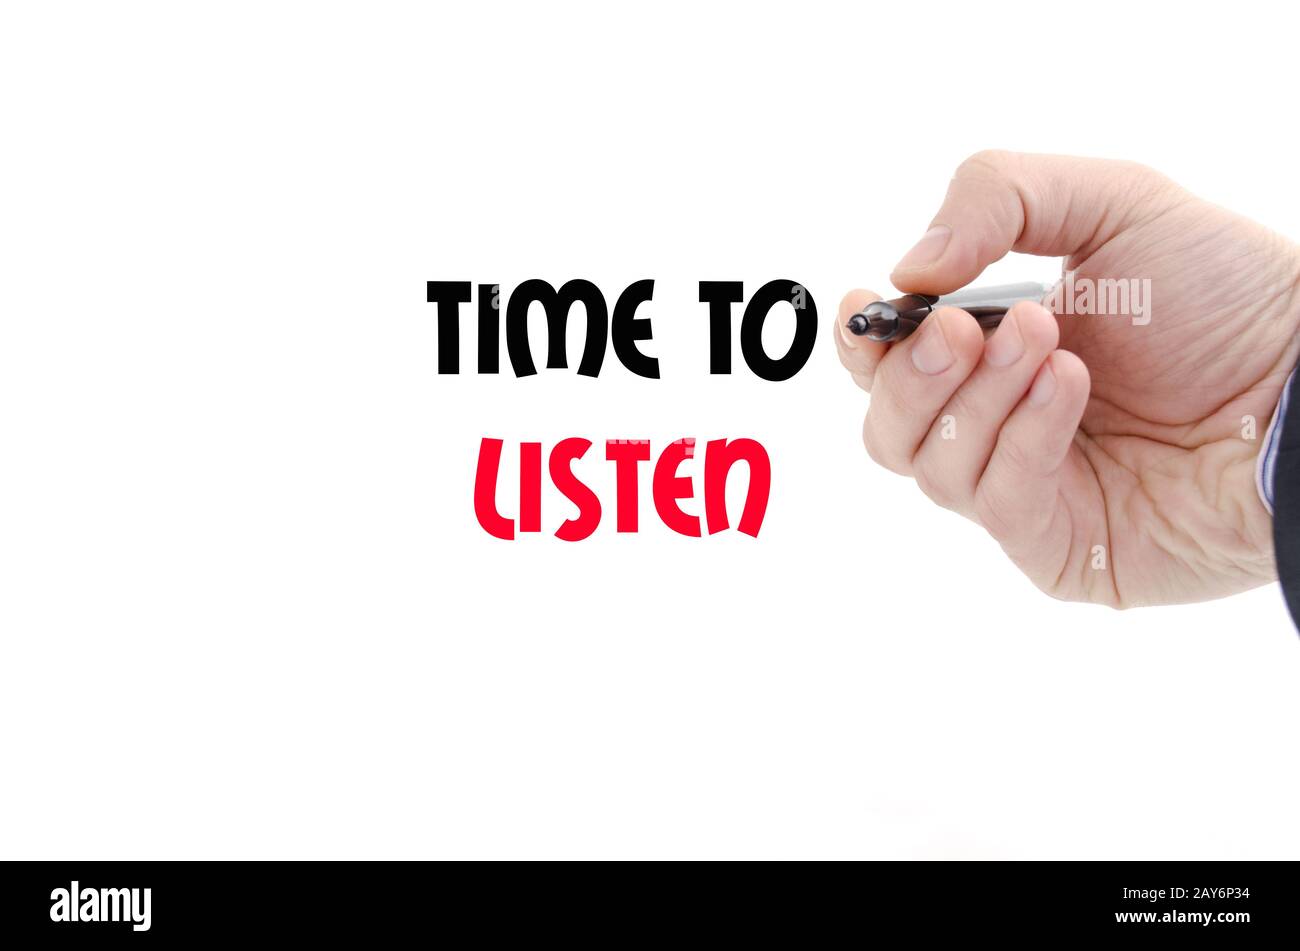 Time to listen text concept Stock Photo